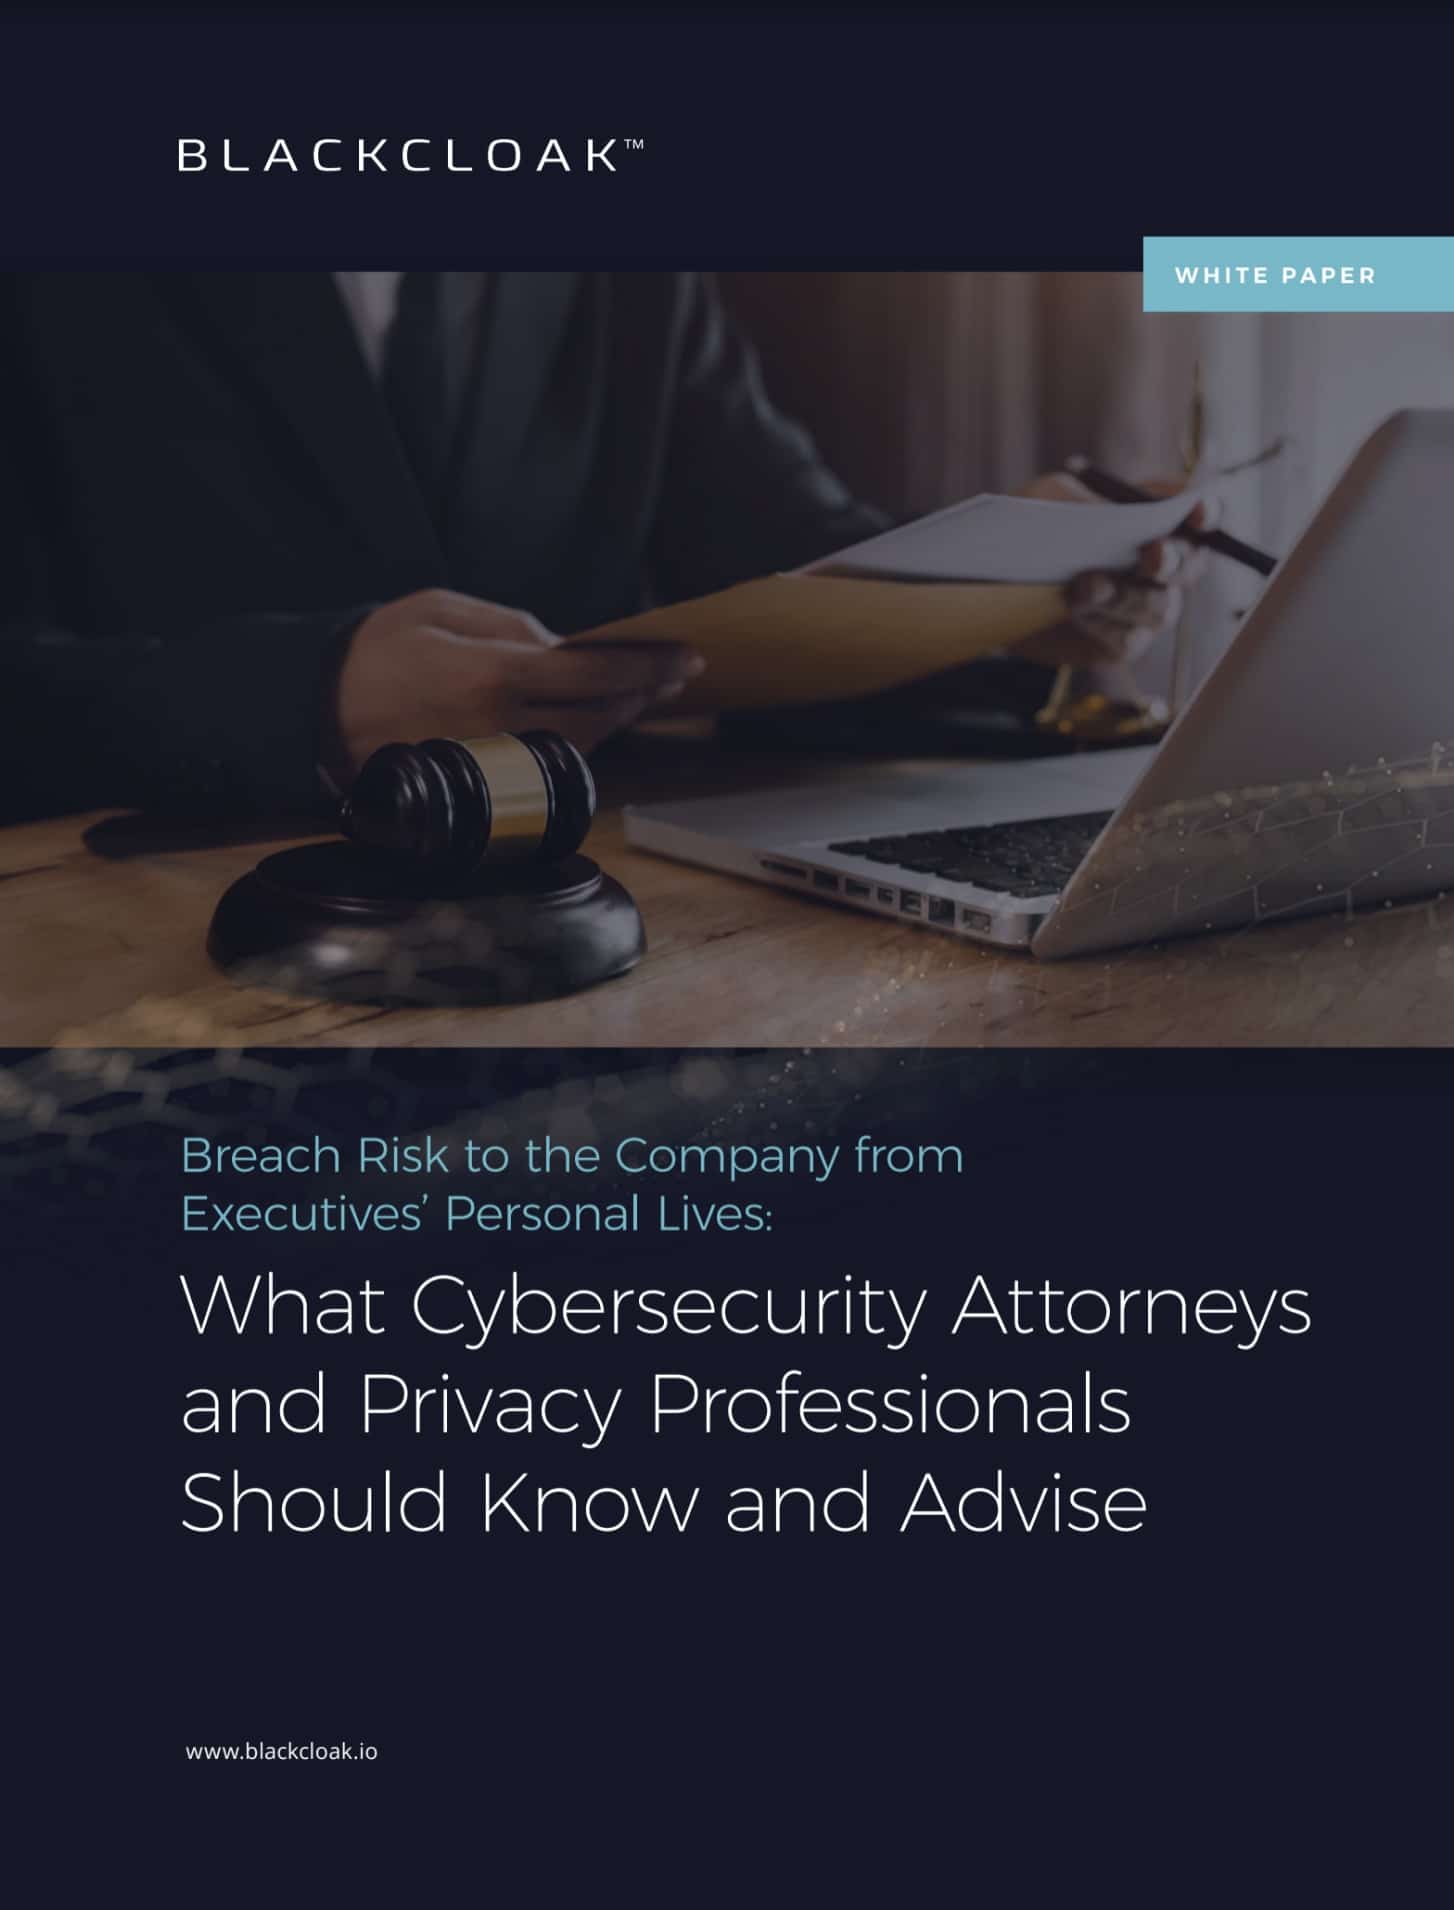 What cybersecurity attorneys and privacy professionals should know and advise